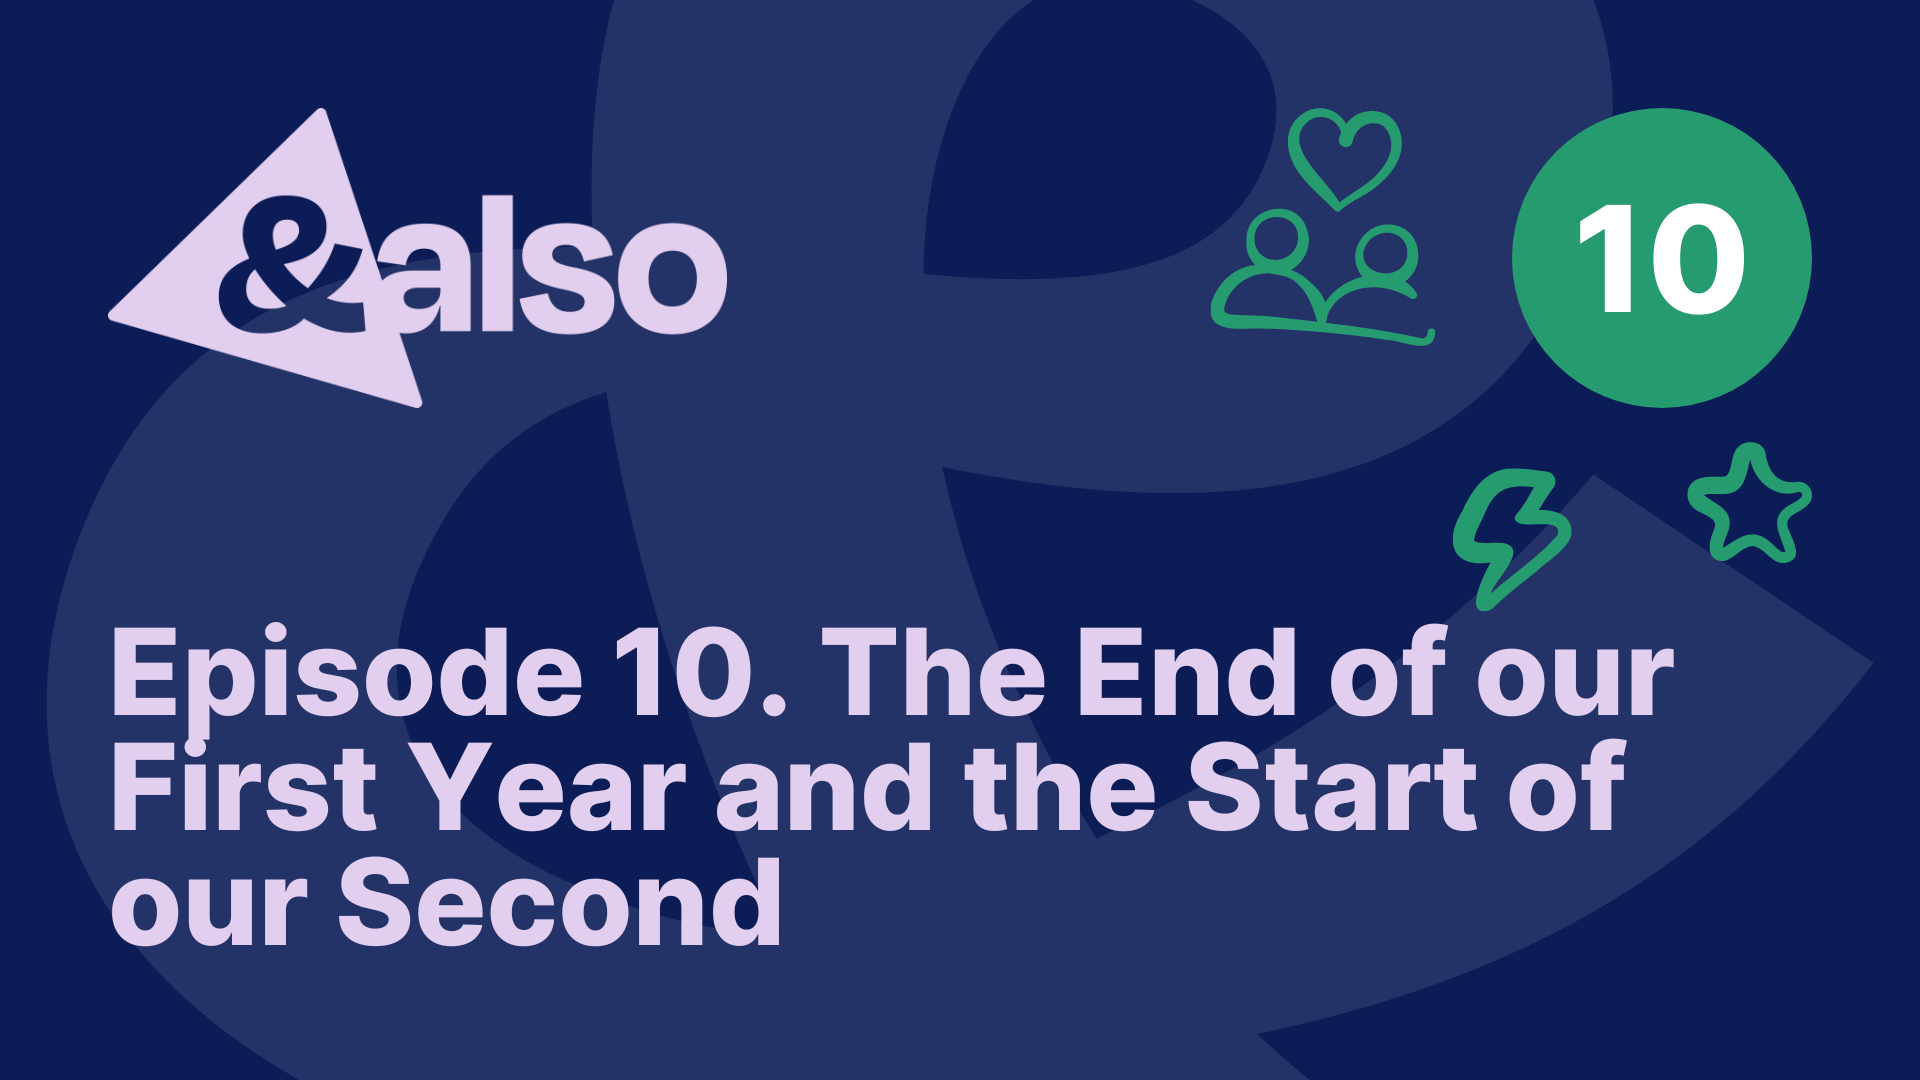 AndAlso: A Podcast – Episode 10. The End of our First Year and the Start of our Second